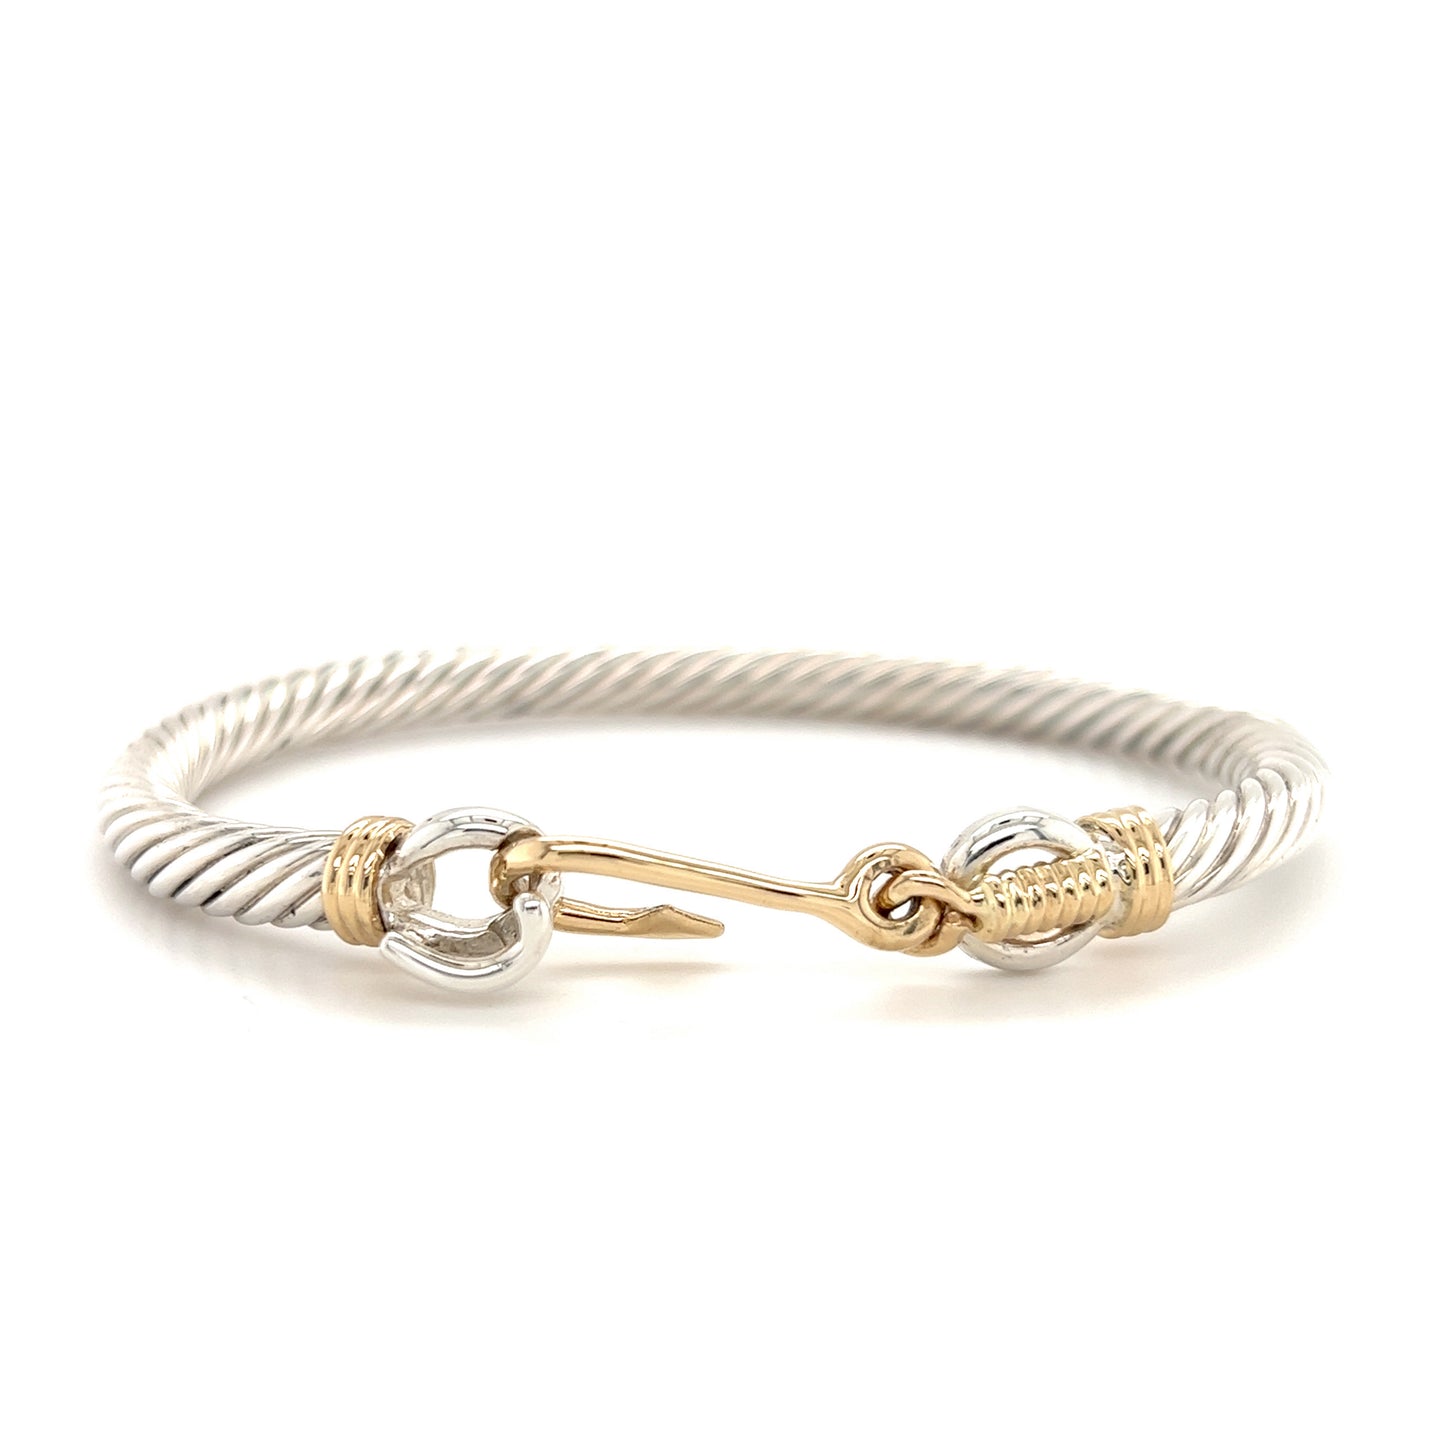 Fish Hook Cable Bangle Bracelet with 14K Wraps and Clasp in Sterling Silver Front View